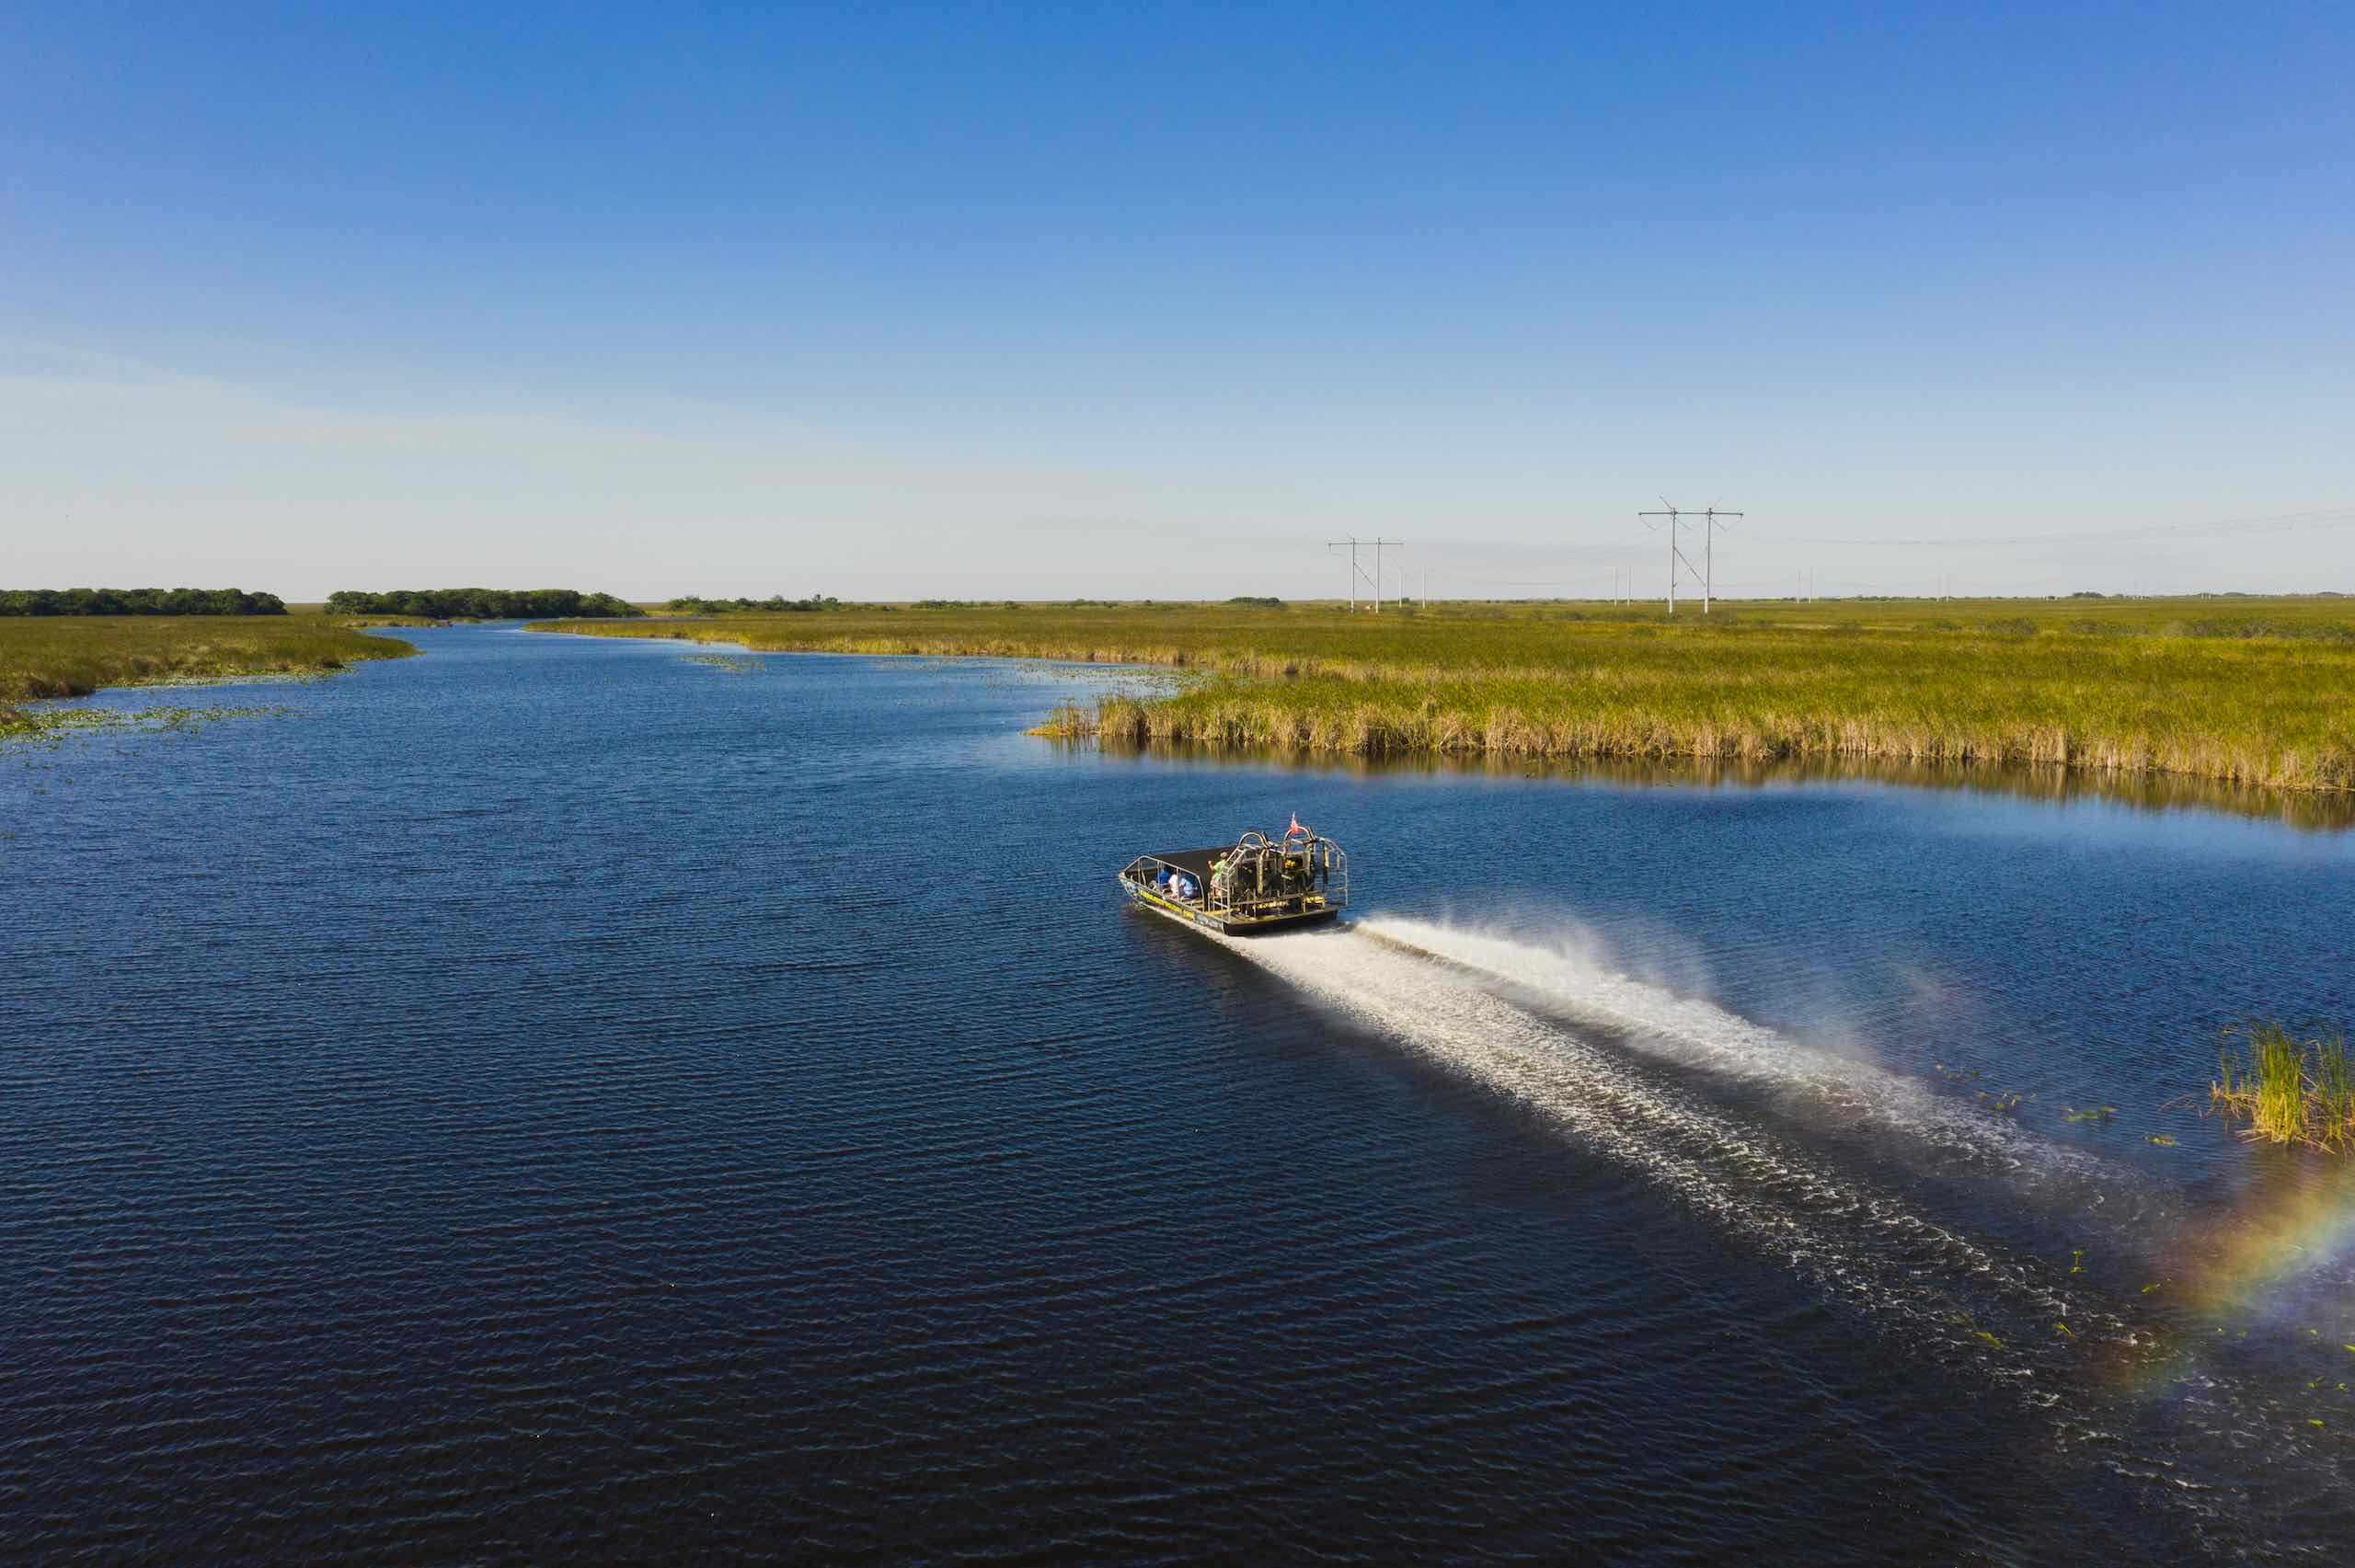 Everglades Holiday Park View from behind of an airboat cruising on the water